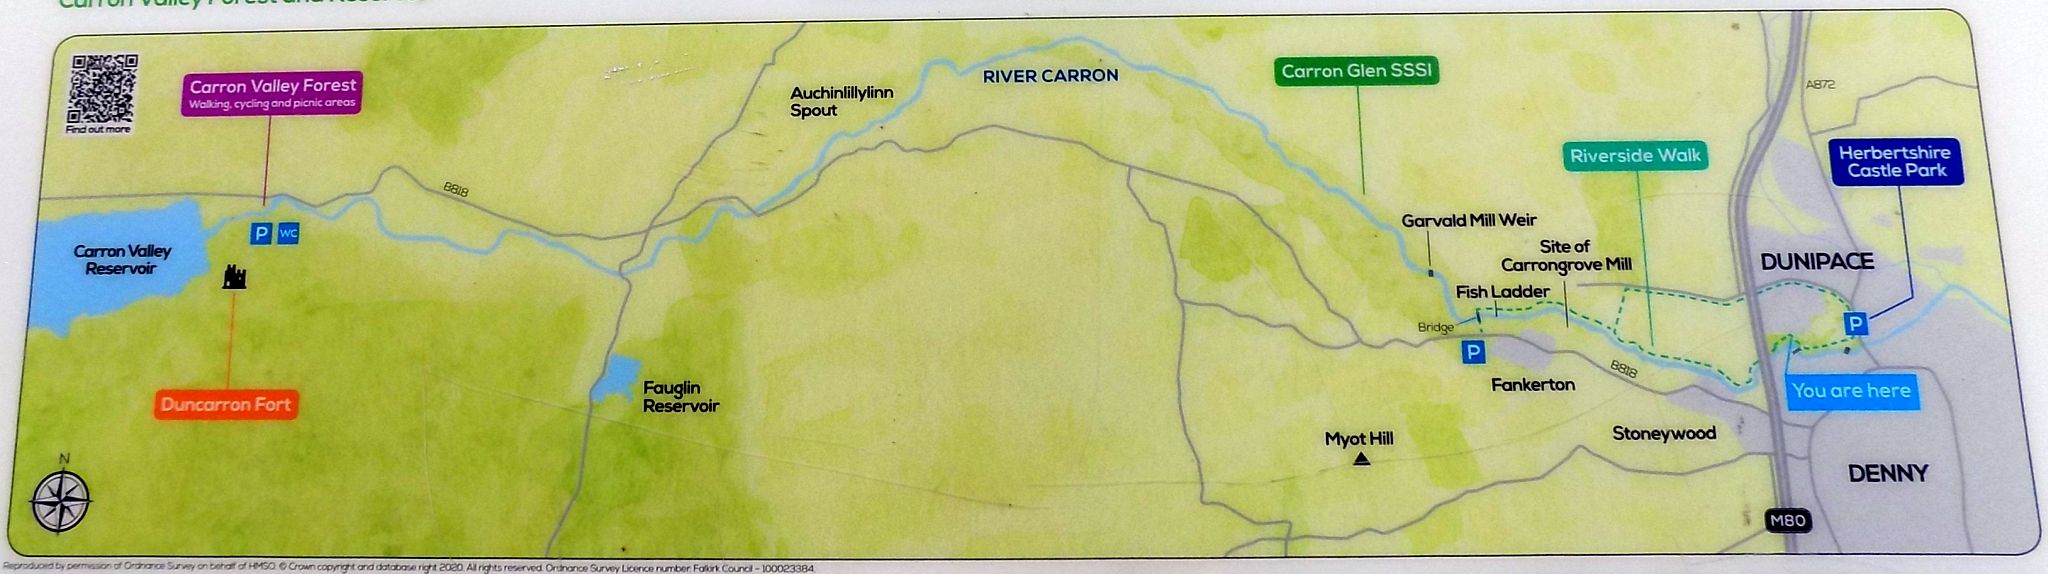 Map of Carron Valley